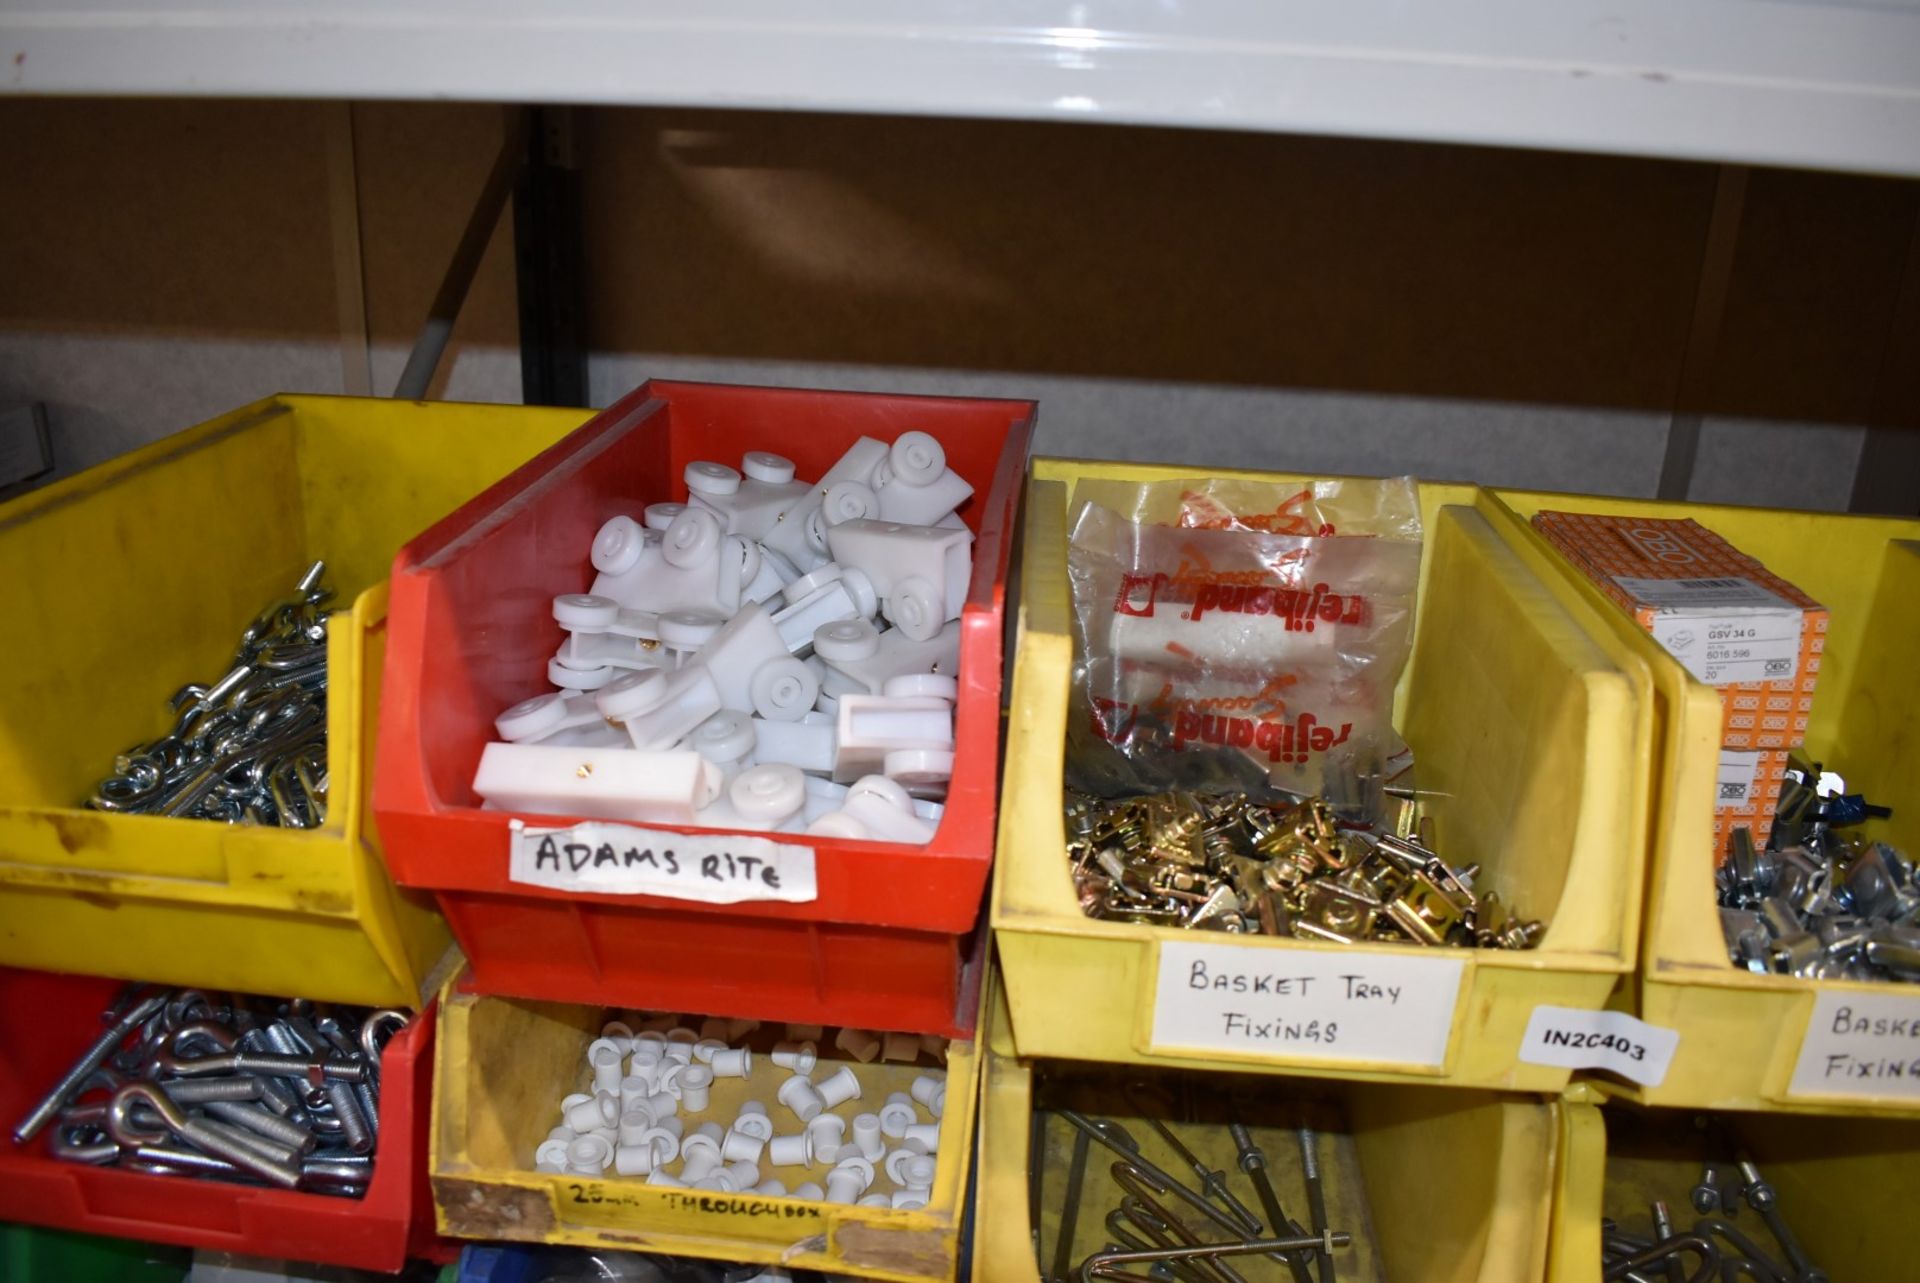 43 x Linbins With Contents - Clamps, Rod Connectors, Zebs, Washers, Bolts, Hex Nuts, Cleats & More! - Image 26 of 37